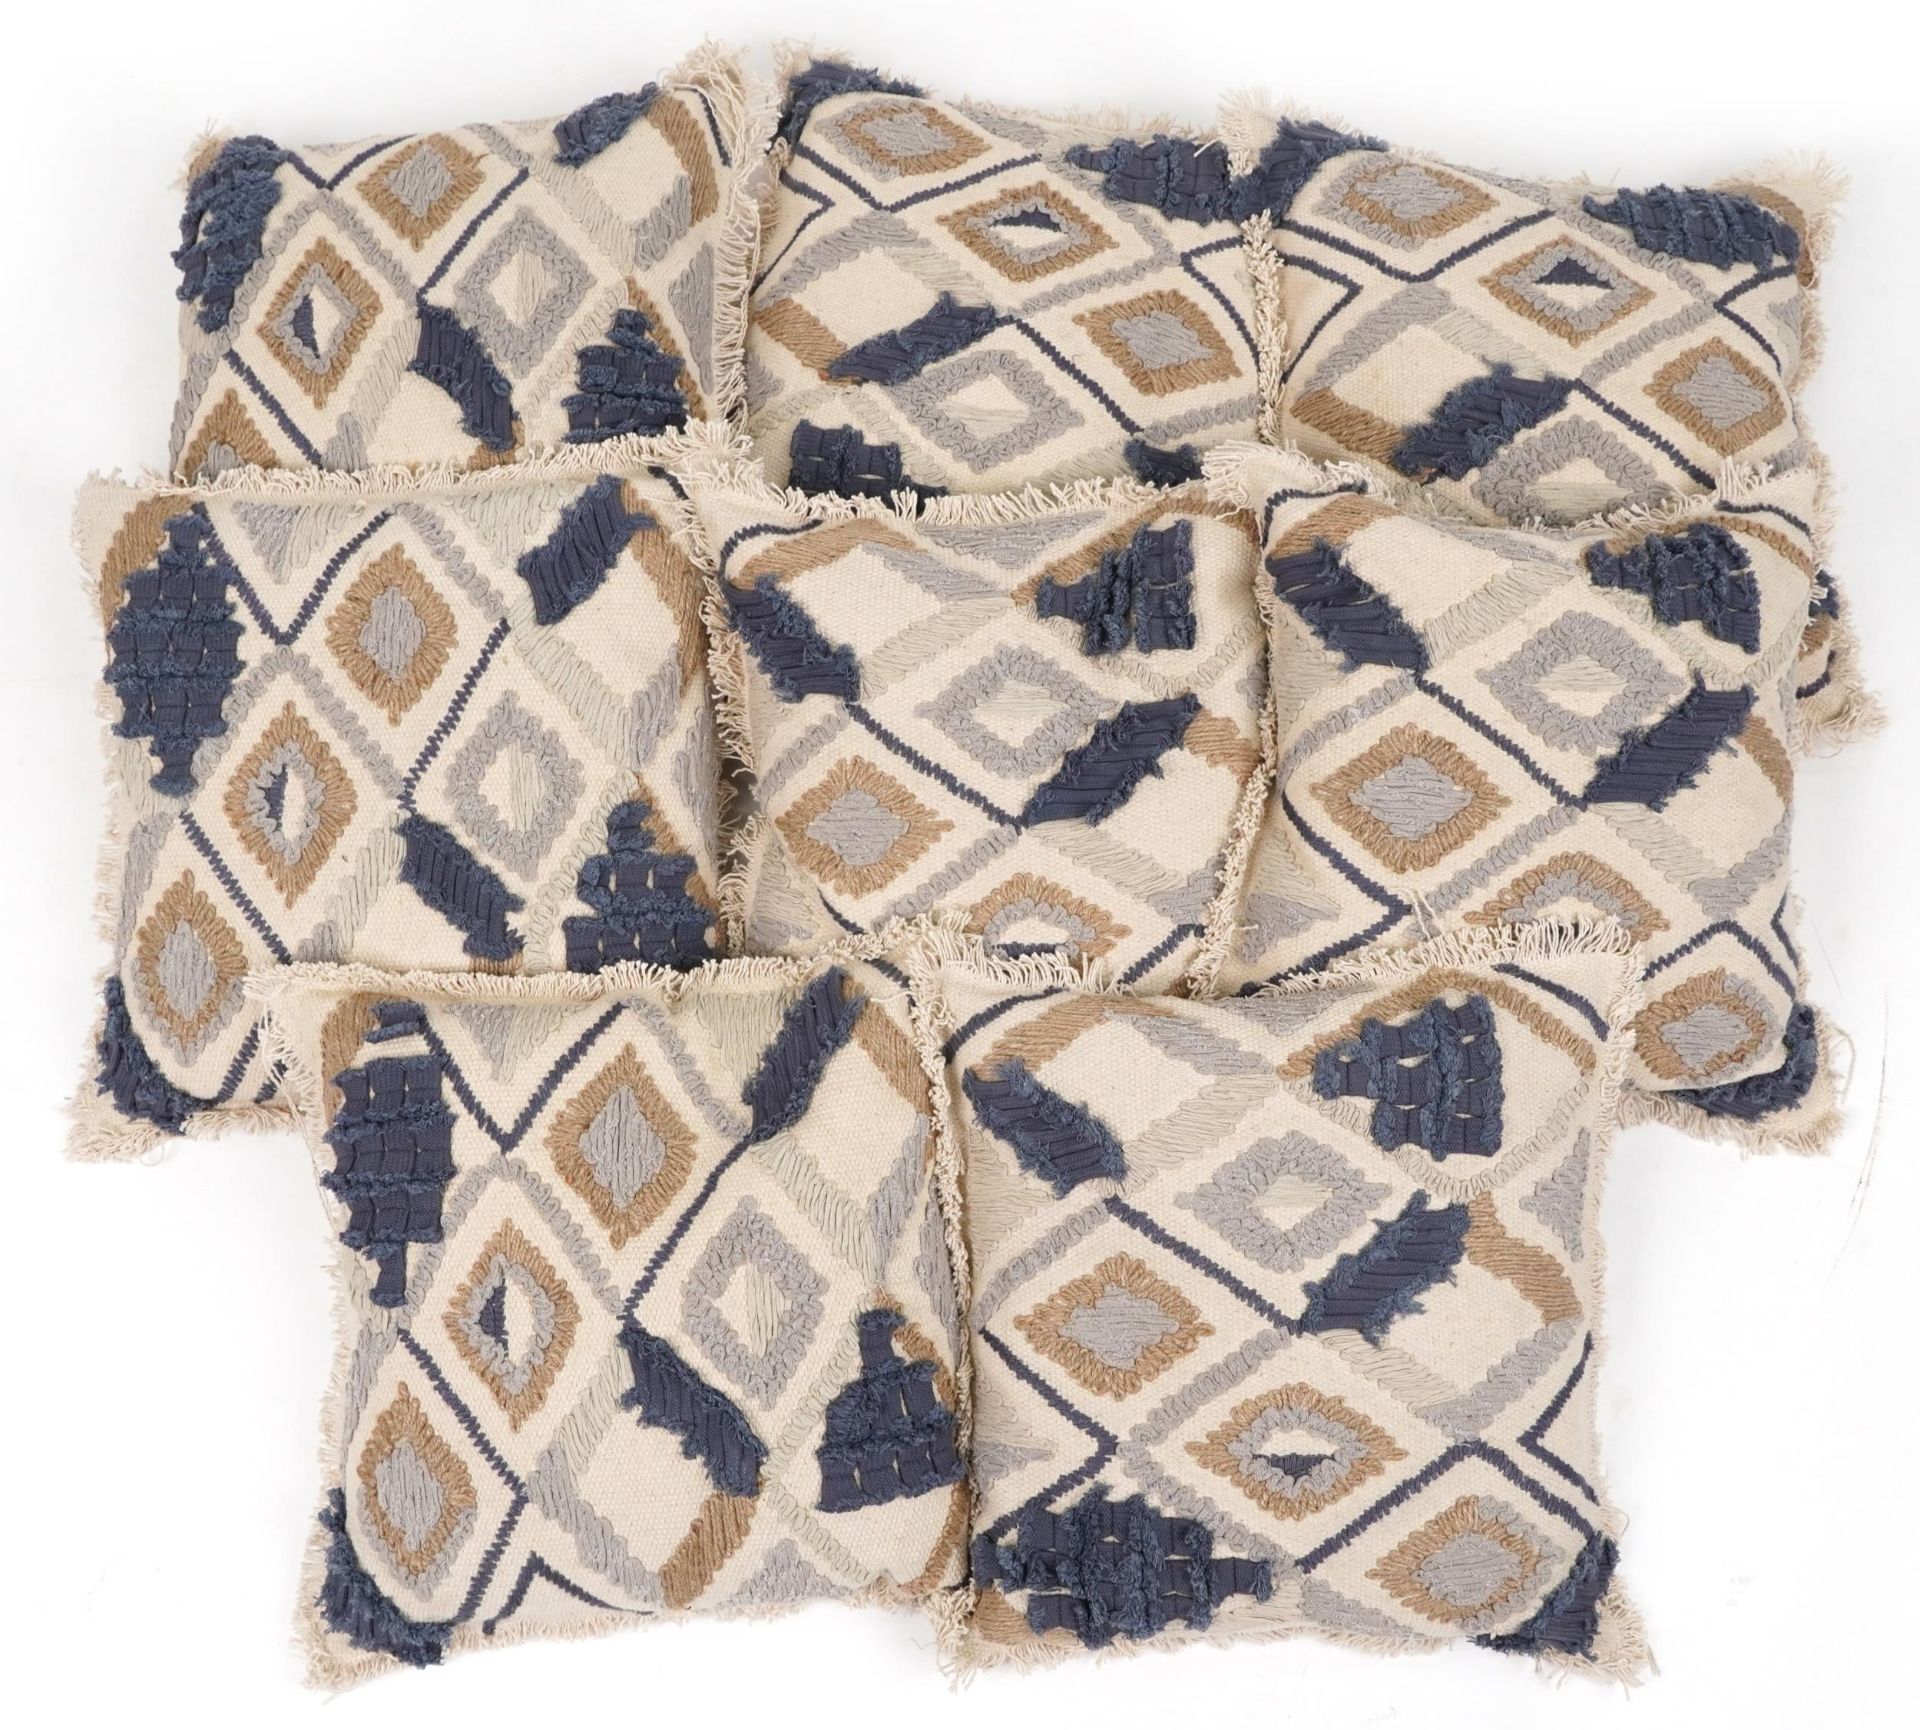 Boheme, eight Kilim style cotton geometric scatter cushions, 45cm x 45cm : For further information